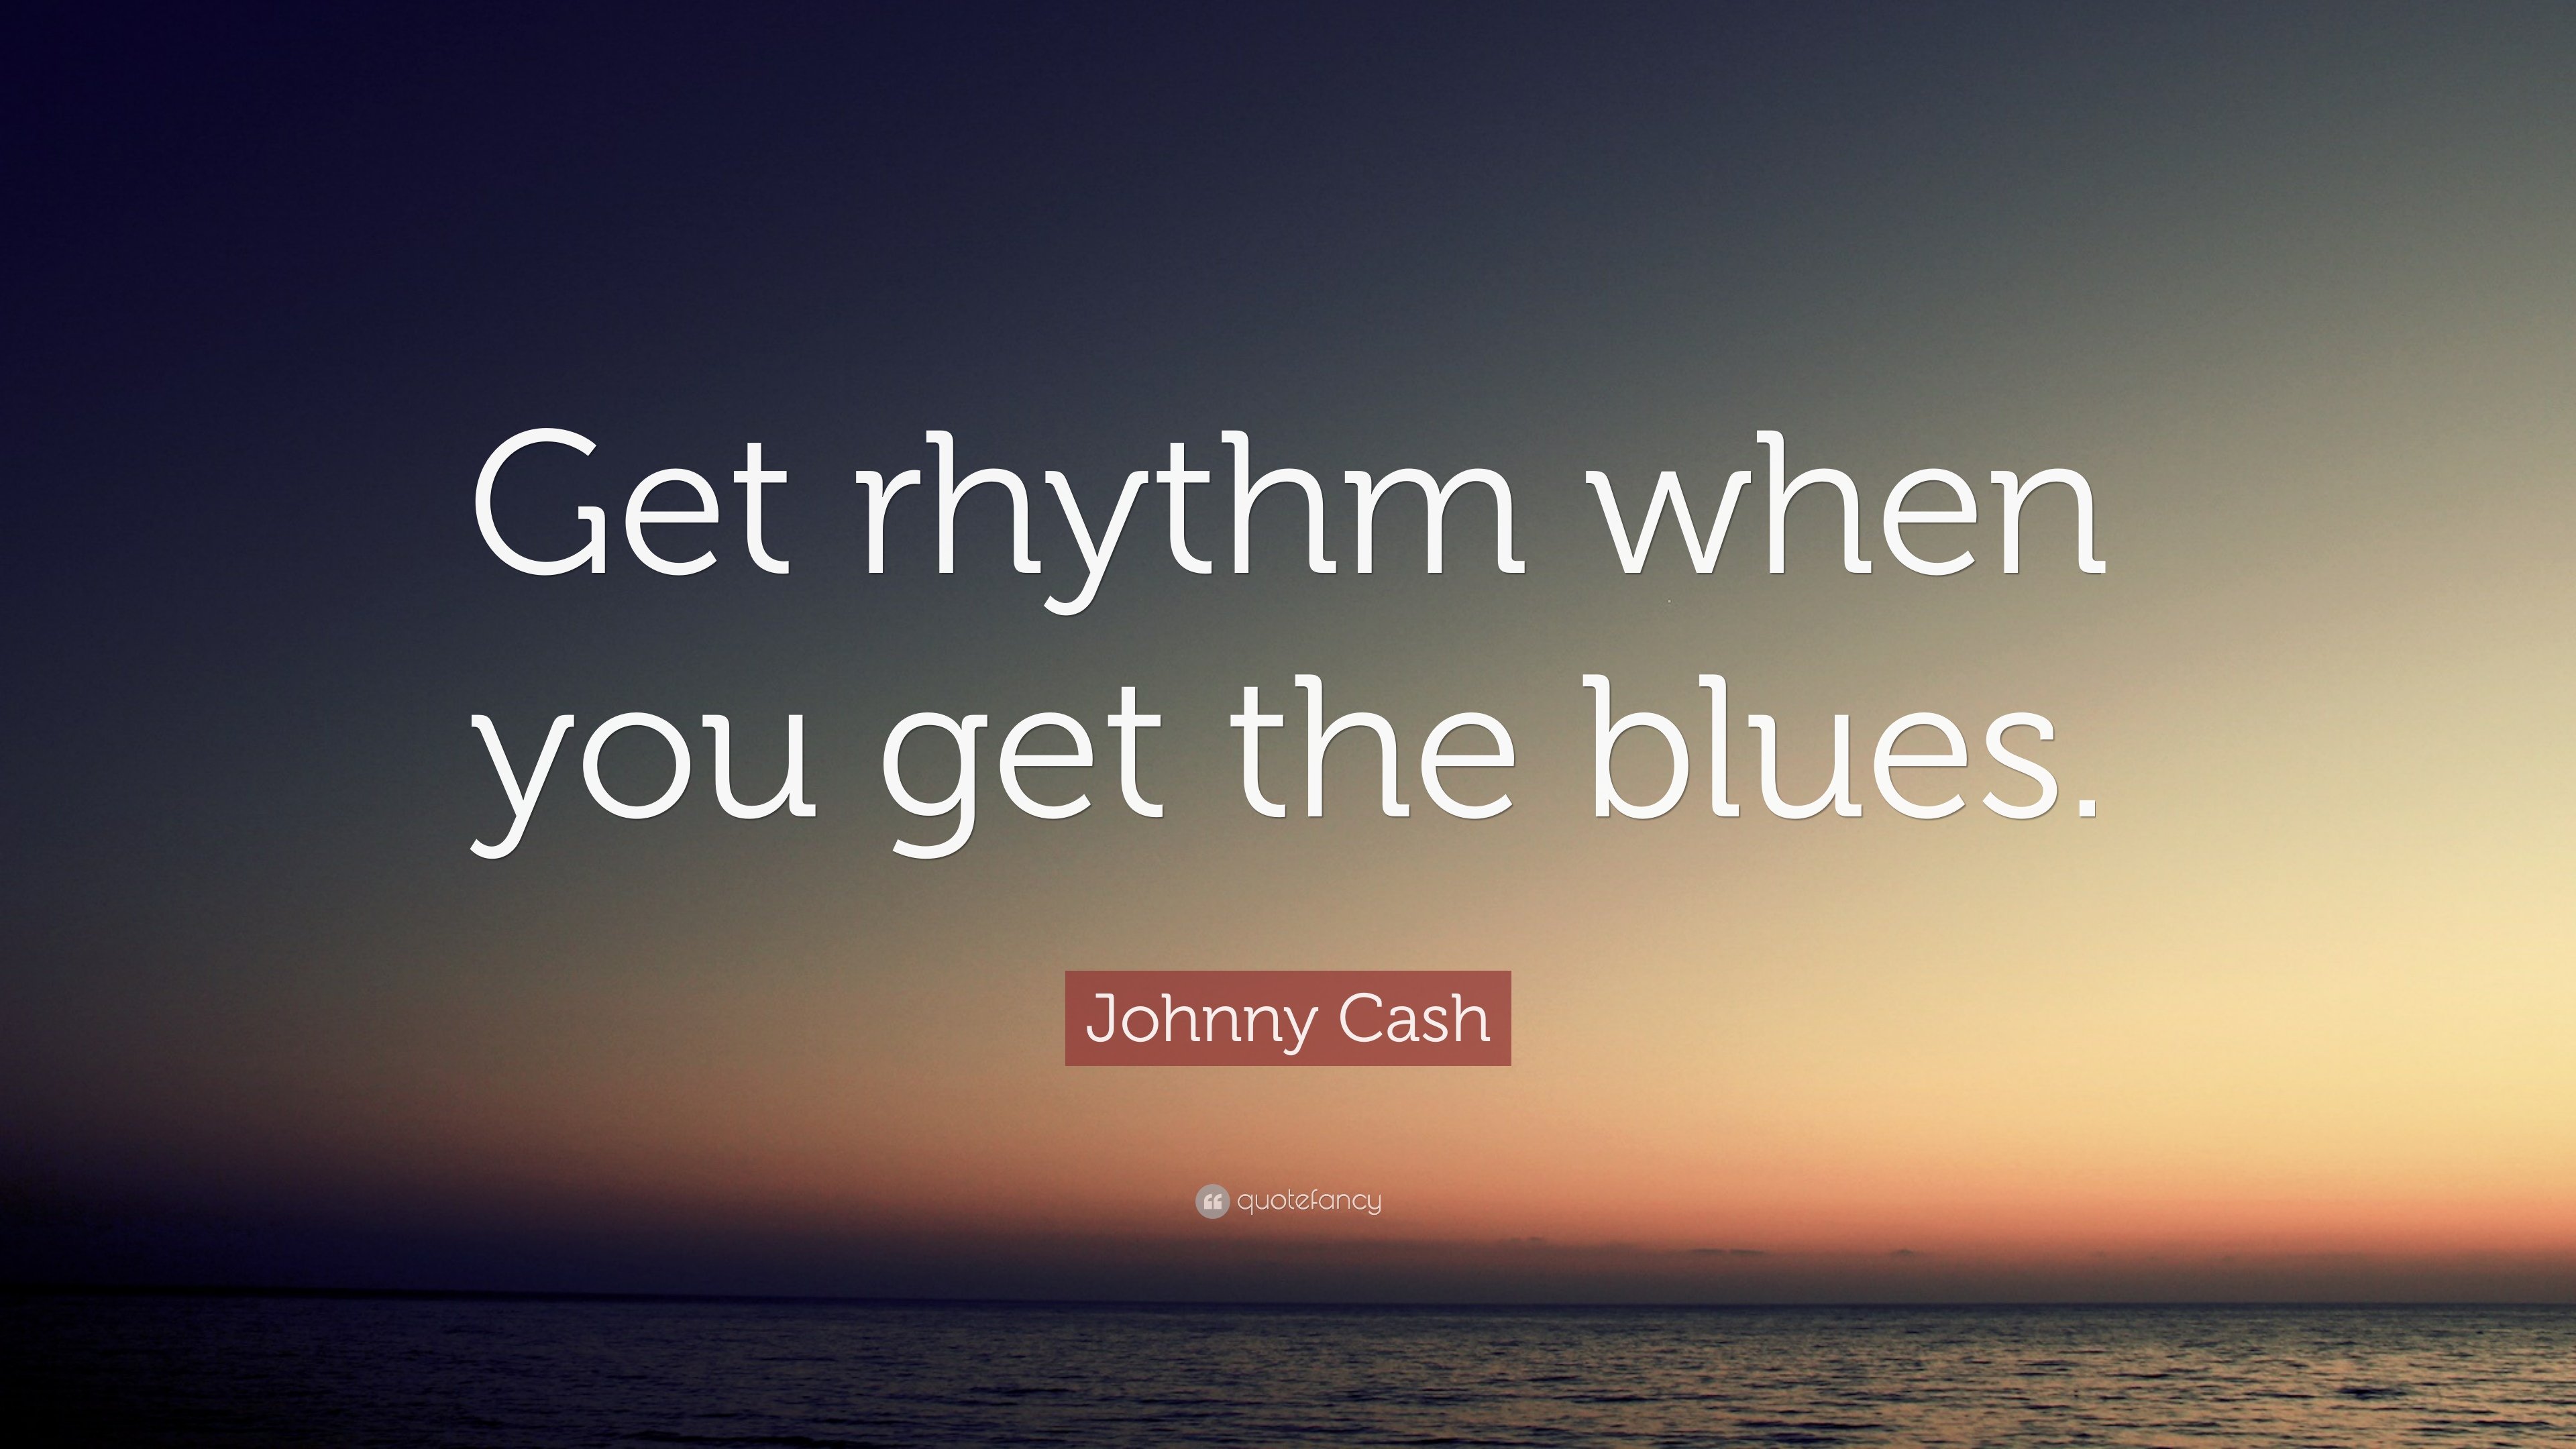 Johnny Cash Quote: “Get rhythm when you get the blues.” 12